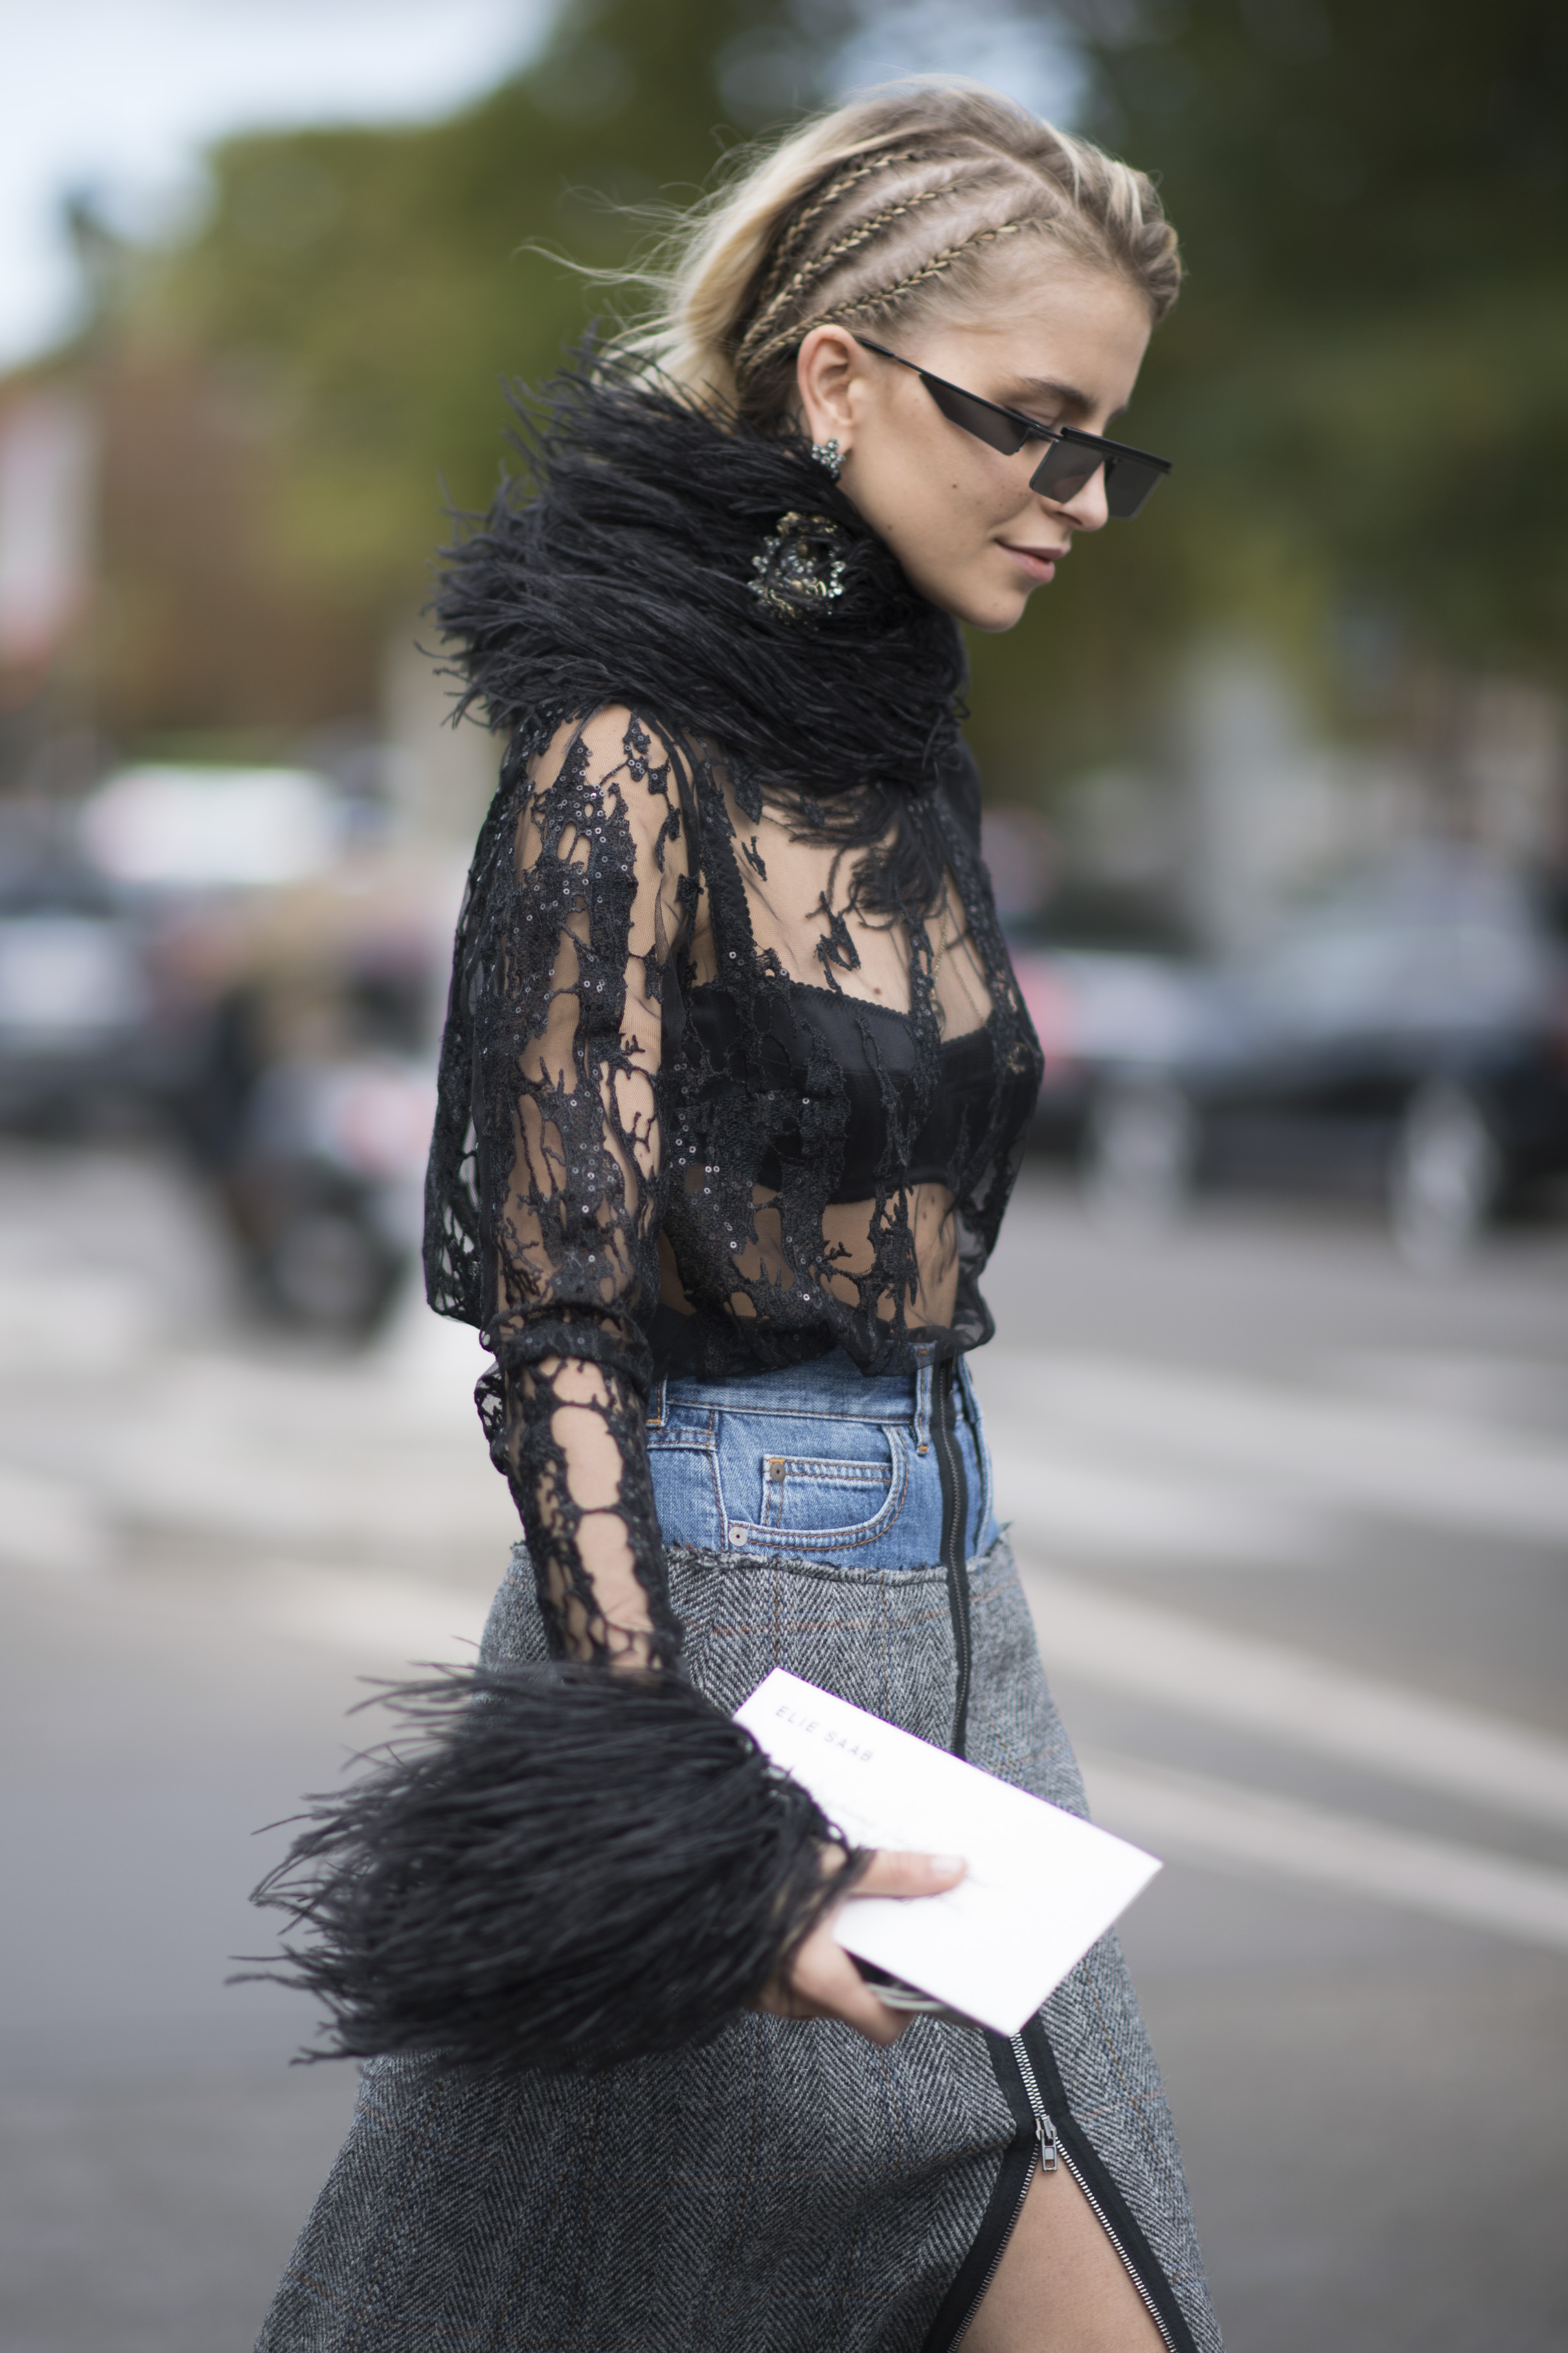 PARIS, FRANCE - SEPTEMBER 30: Caro Daur seen in the streets of Paris during the Paris Fashion Week on September 30, 2017 in Paris, France. (Photo by Timur Emek/Getty Images)